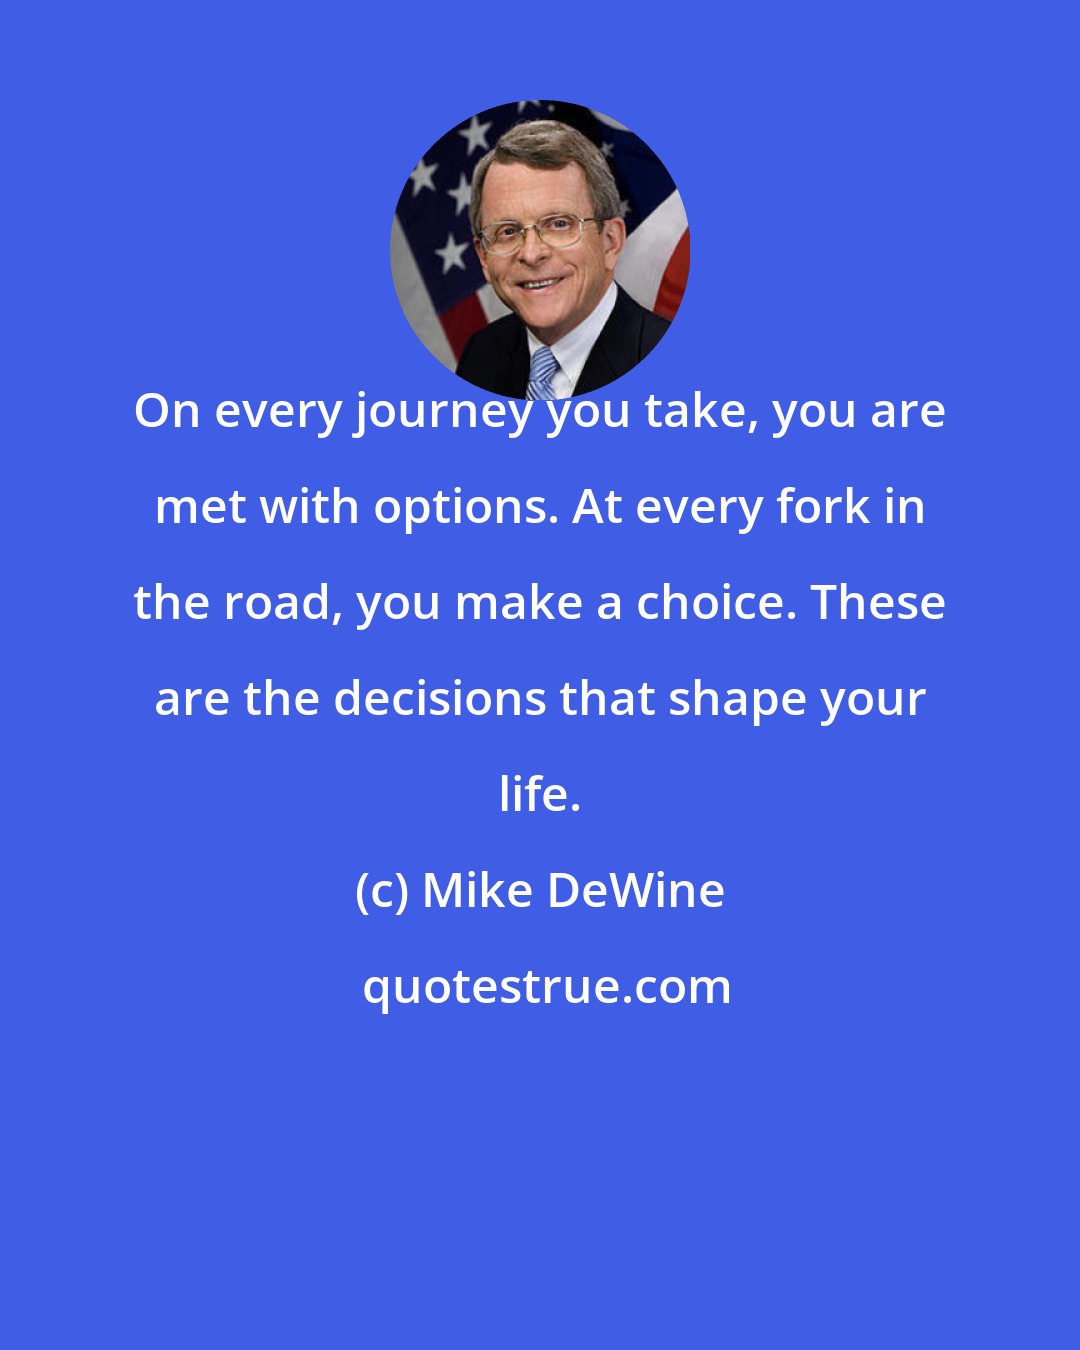 Mike DeWine: On every journey you take, you are met with options. At every fork in the road, you make a choice. These are the decisions that shape your life.